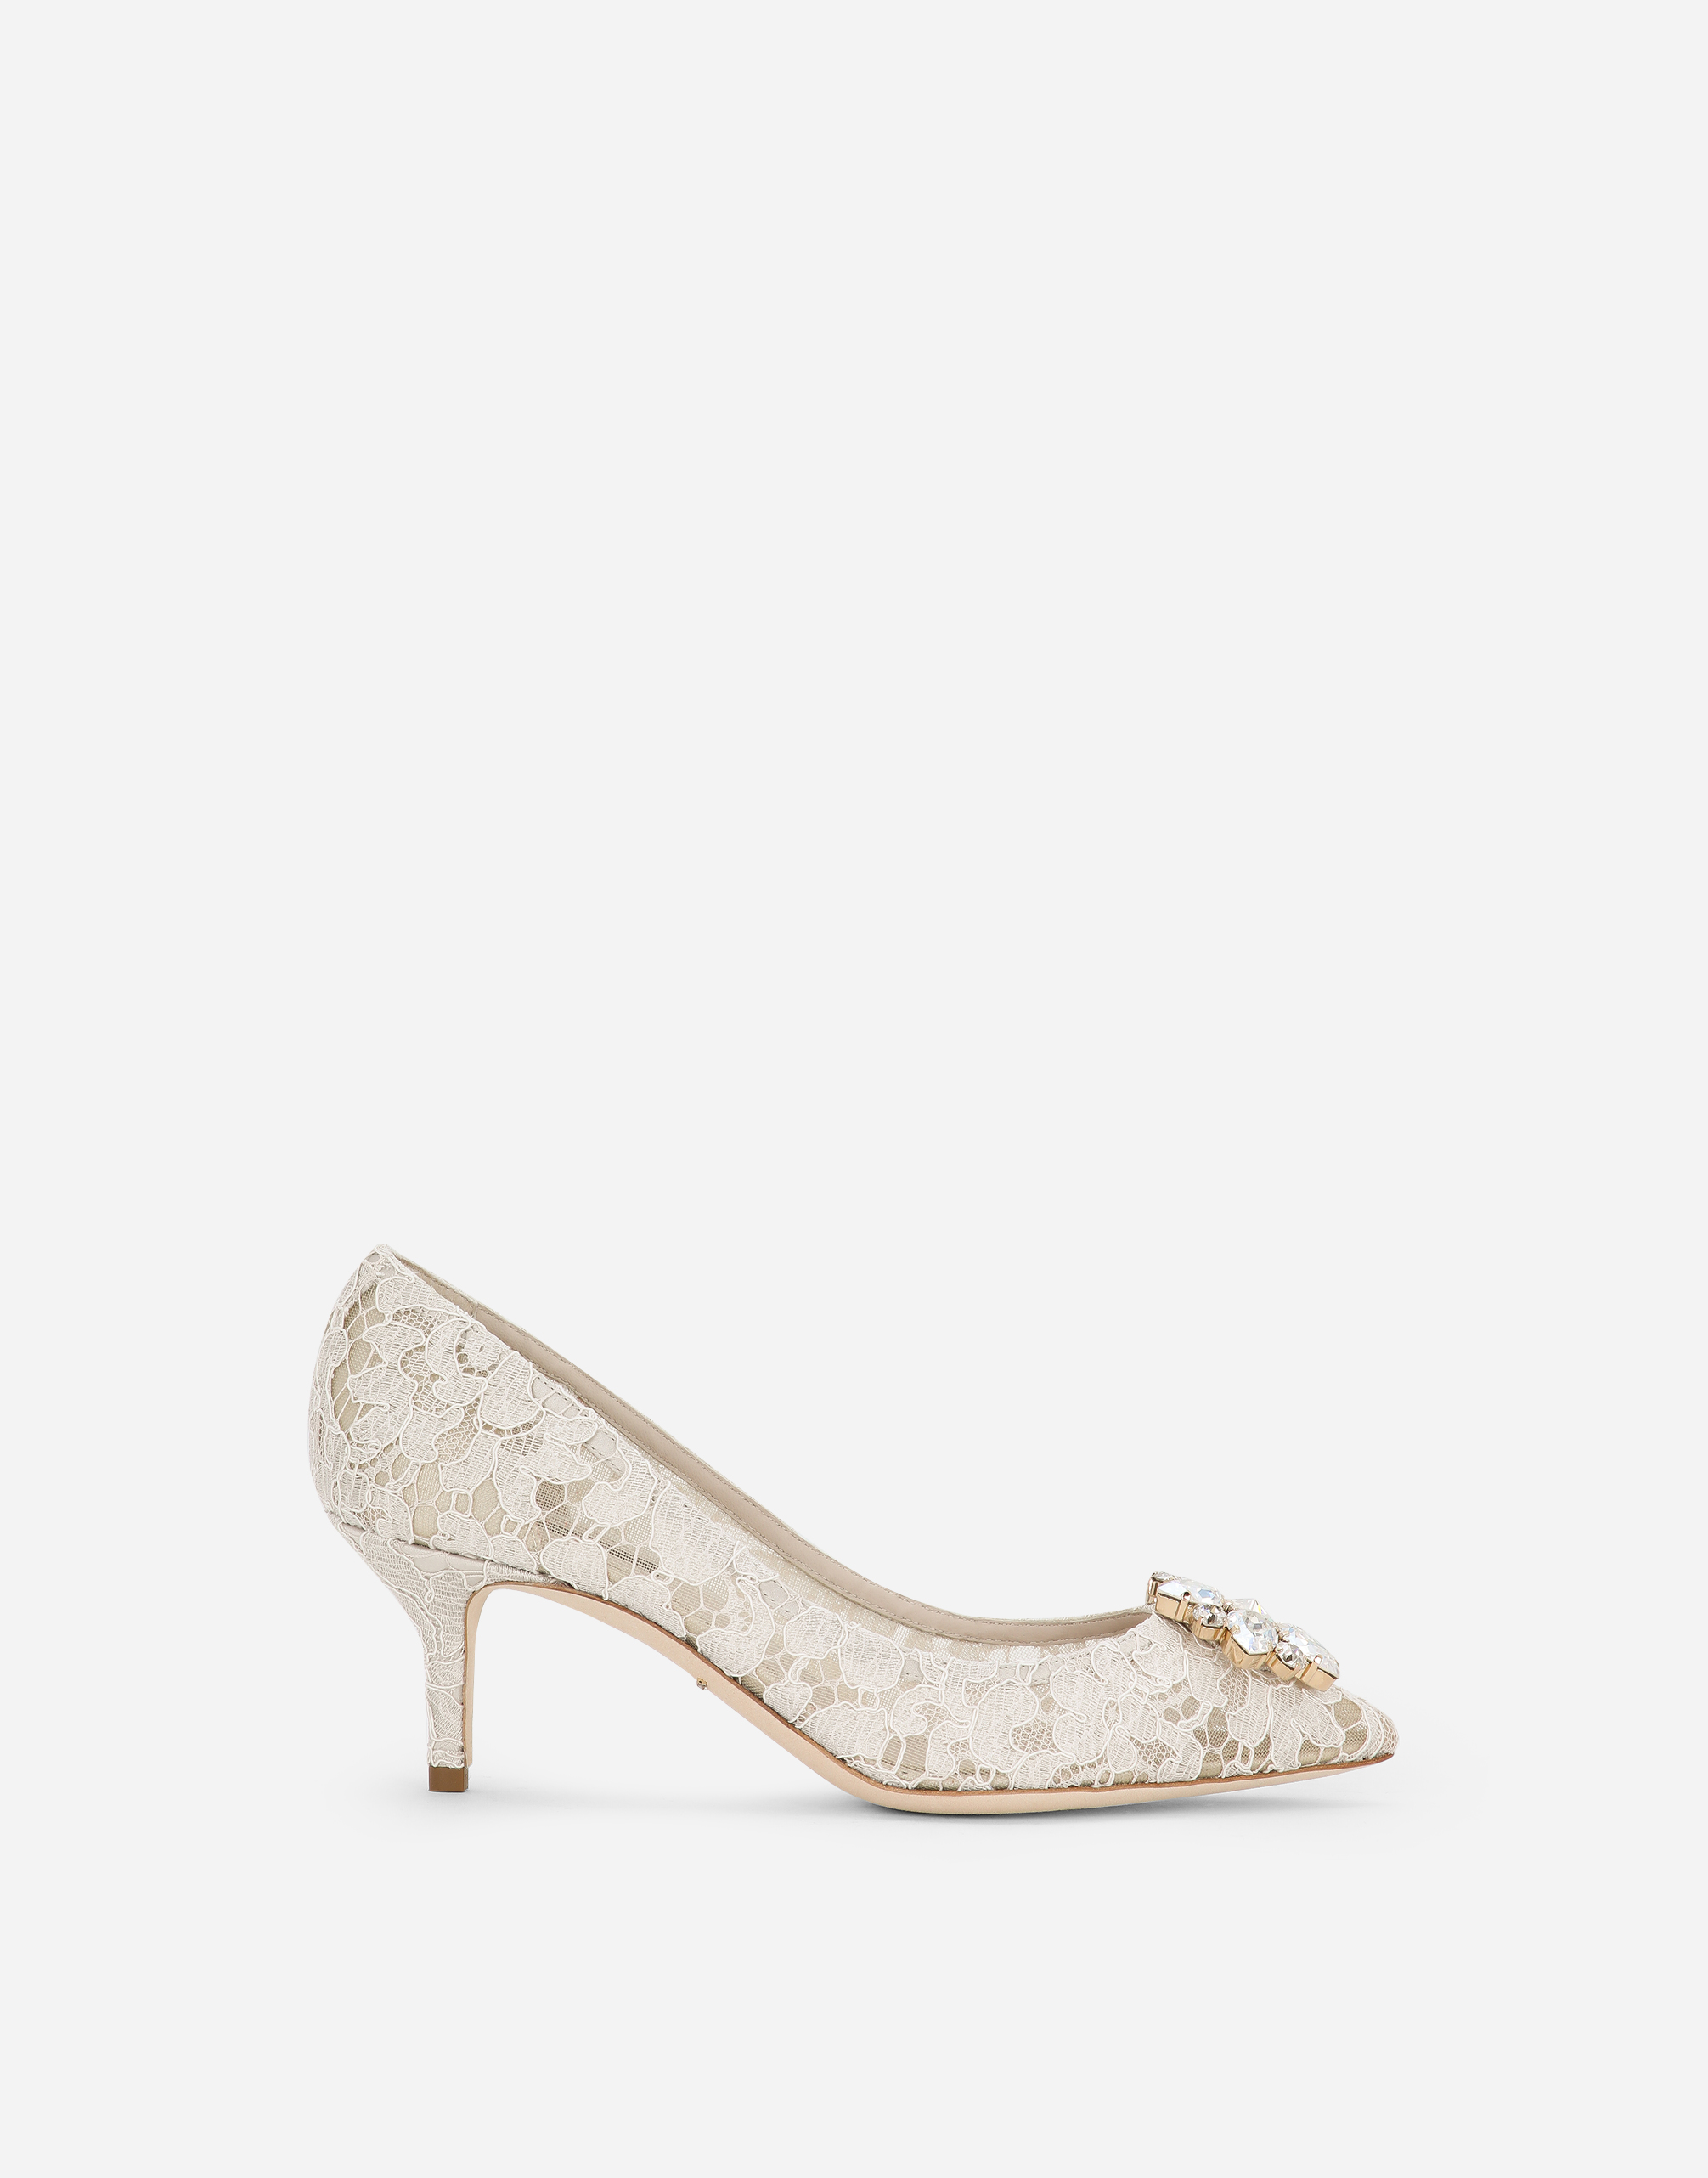 Lace rainbow pumps with brooch detailing in White